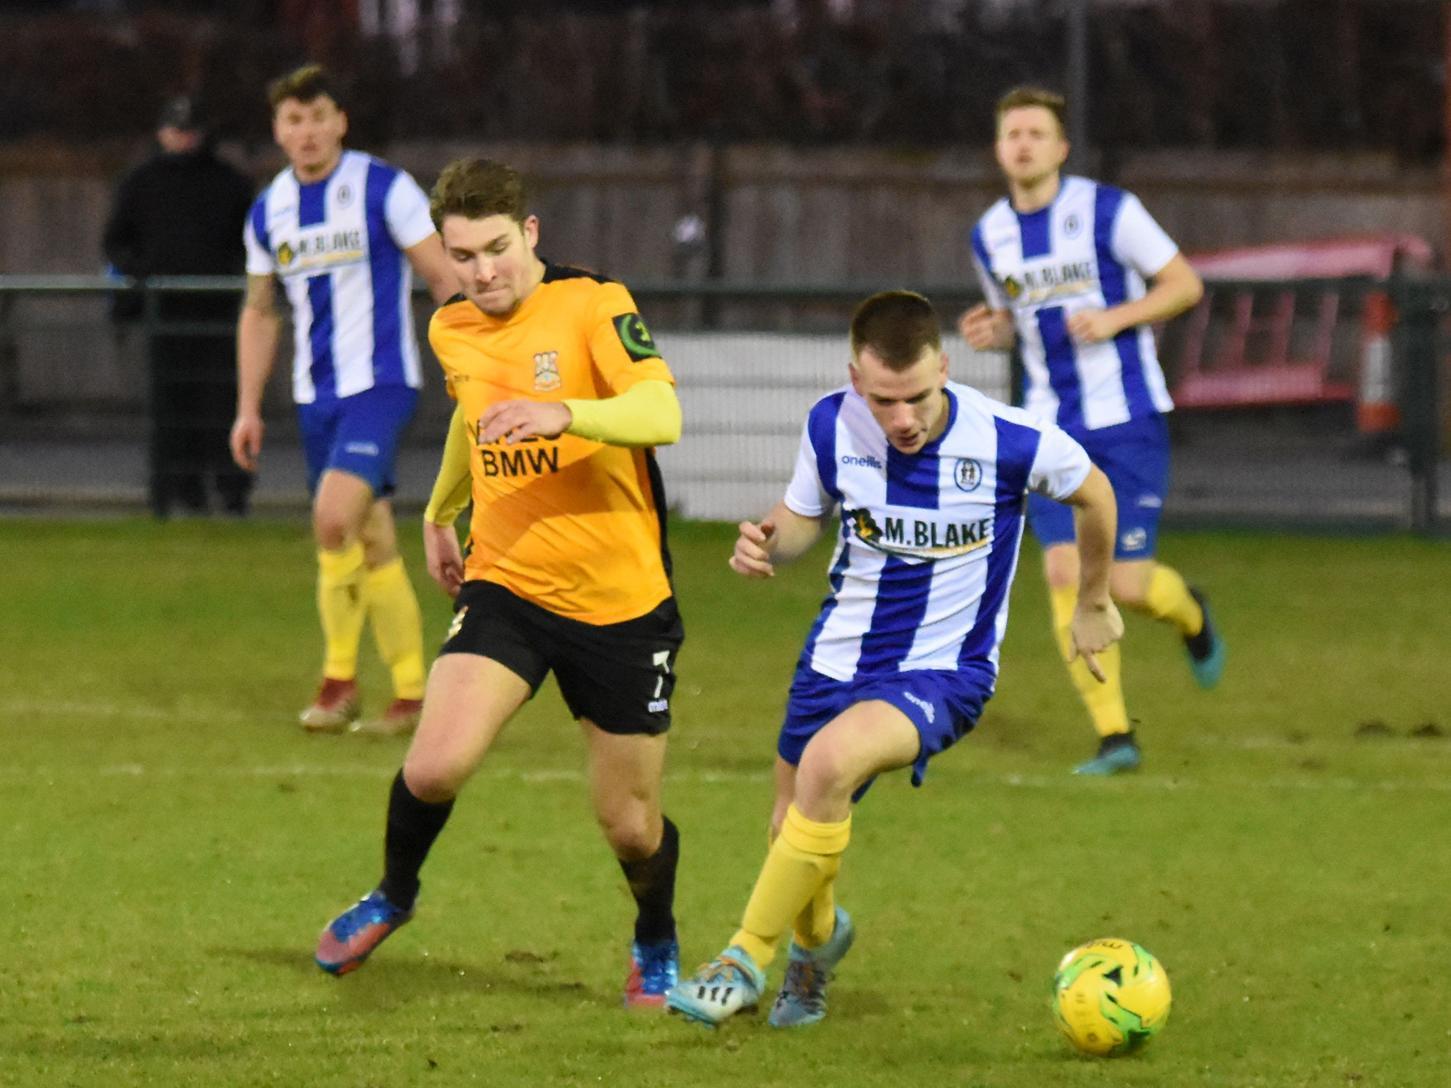 Keiran Rowe gets away from a defender.